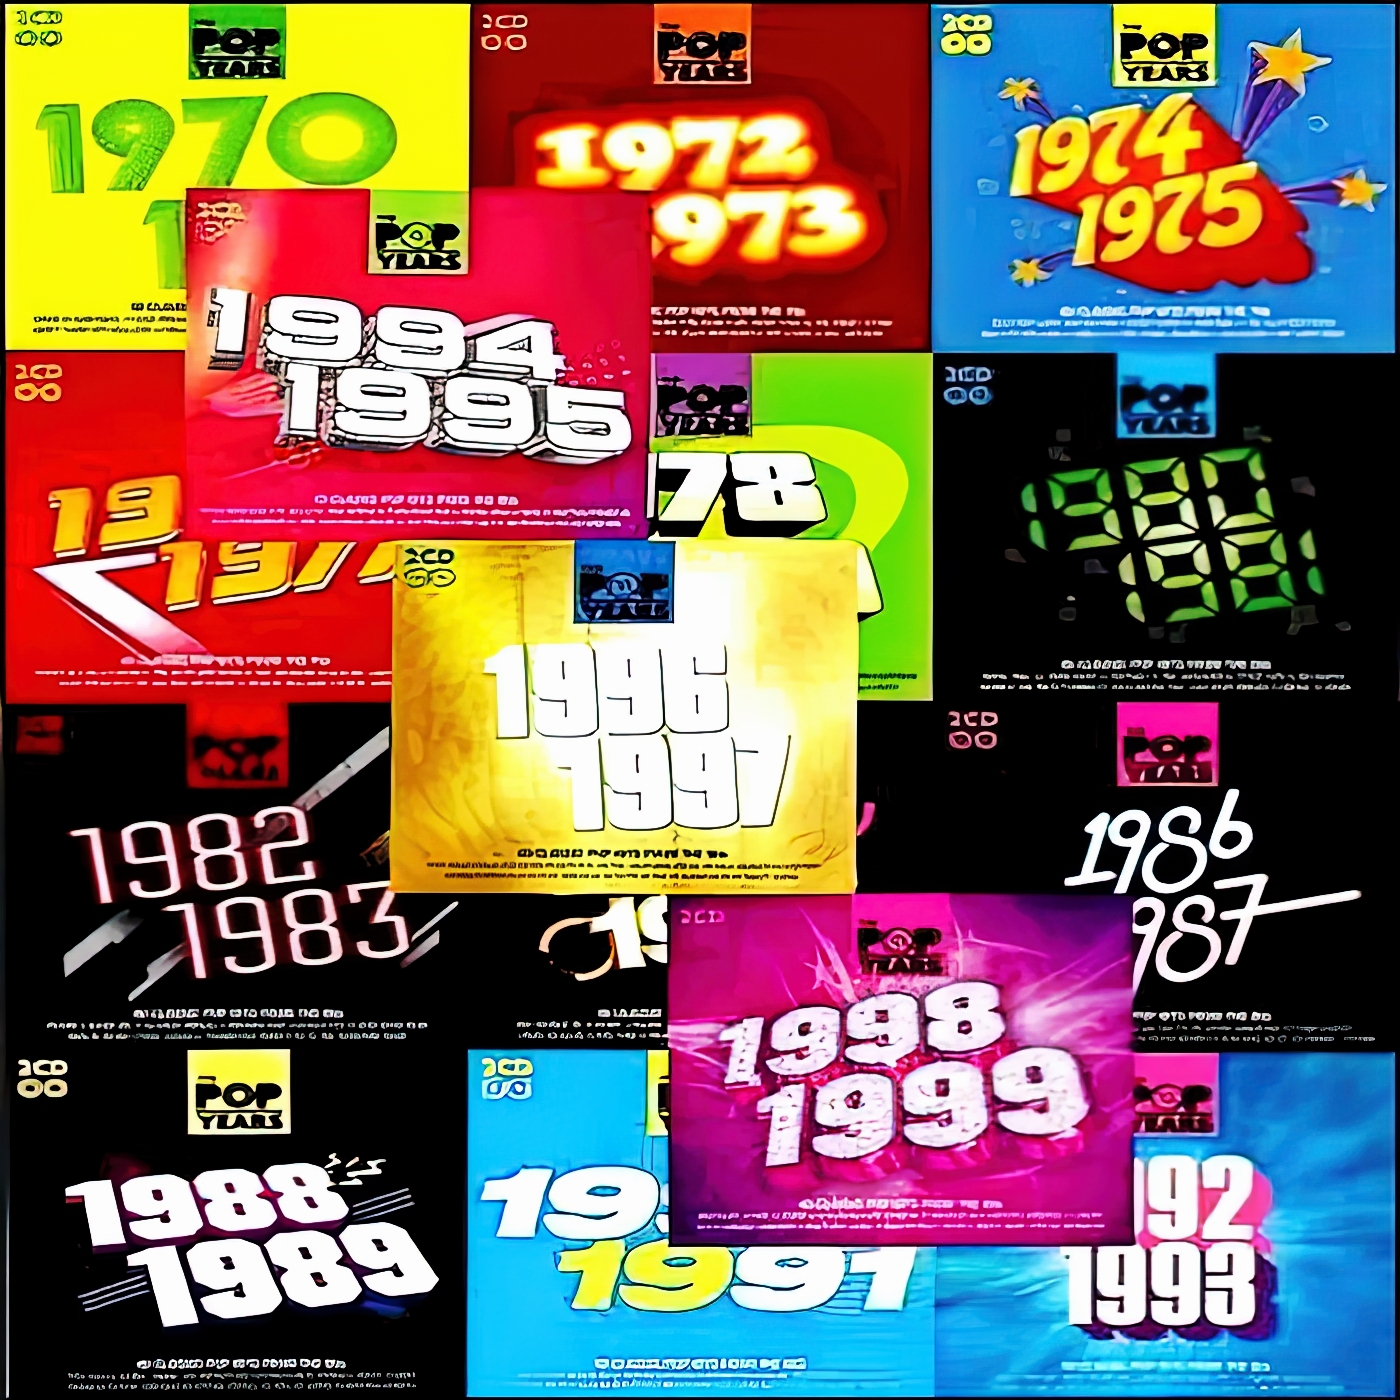 VA - The Pop Years 1970-1999 Complete Collection (2009) [FLAC]